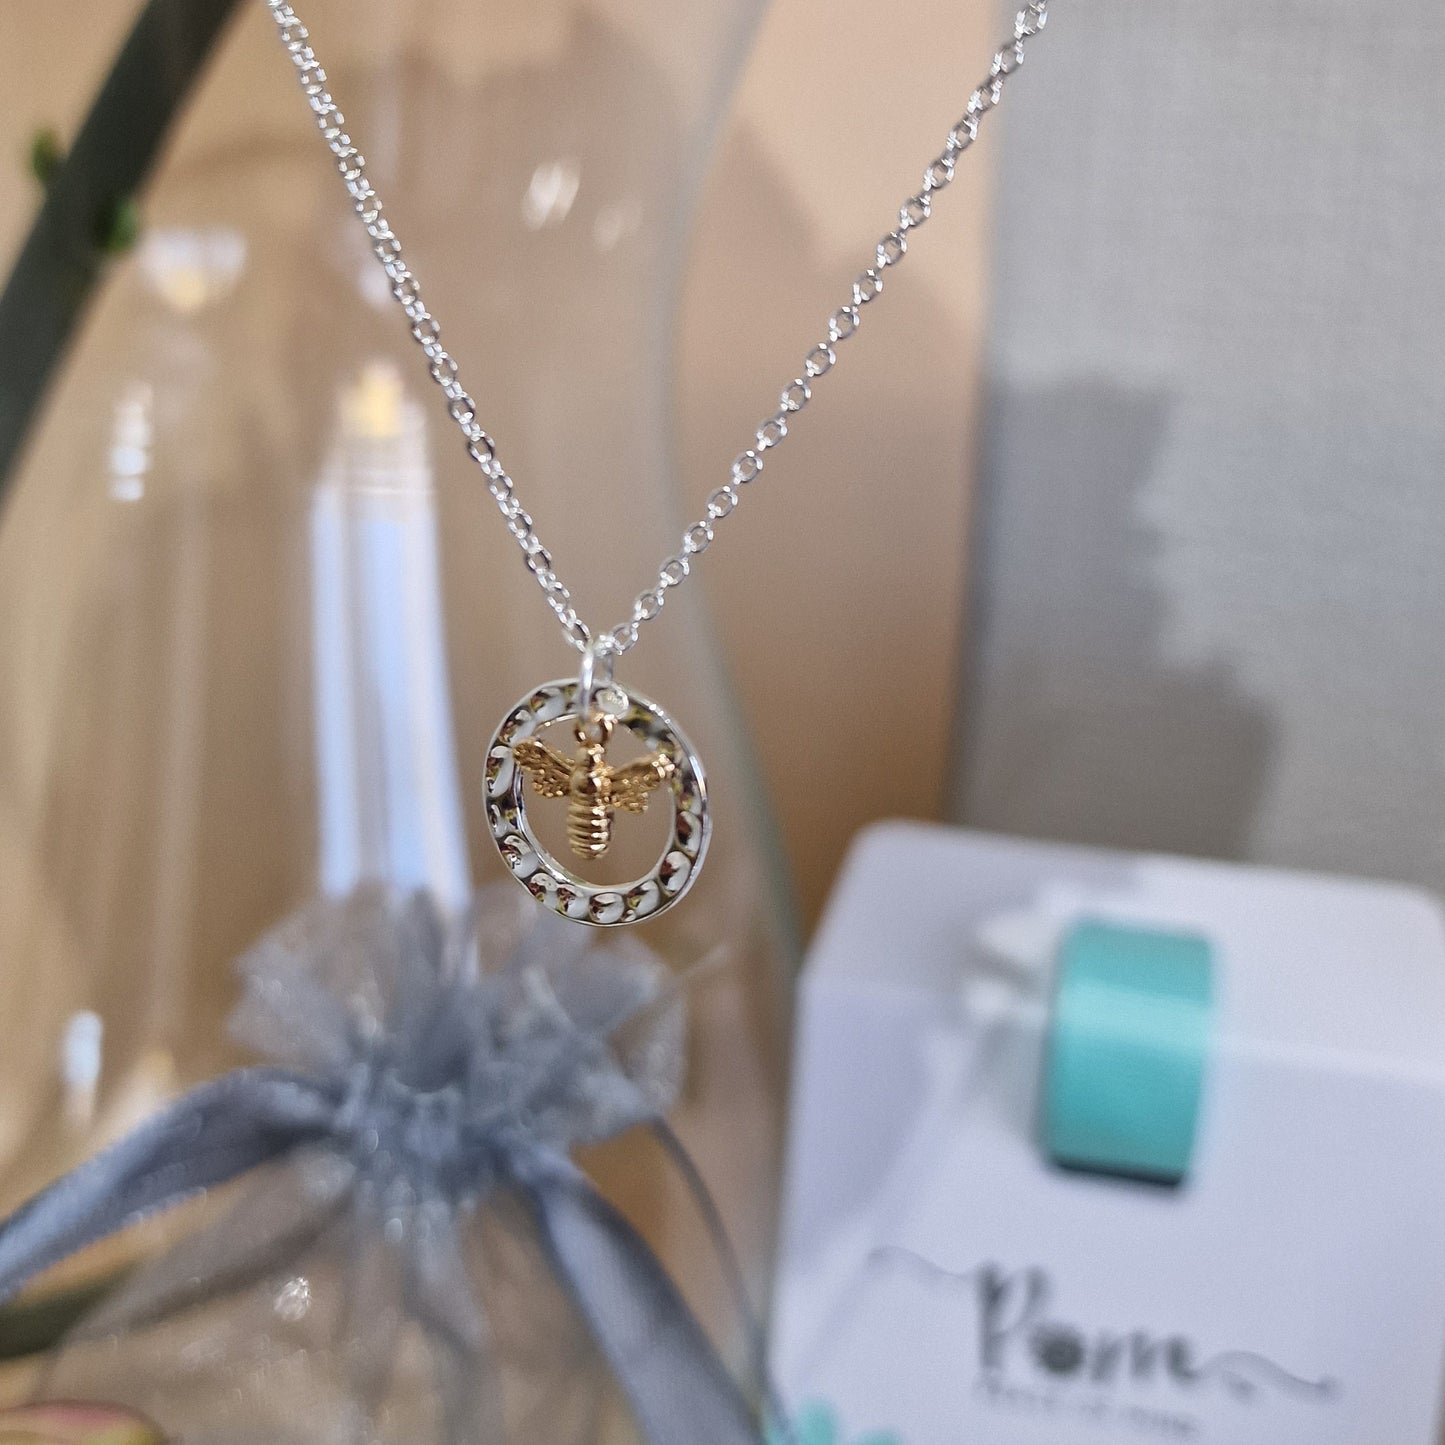 Silver Plated Disc with Gold Bumble Bee Necklace by POM